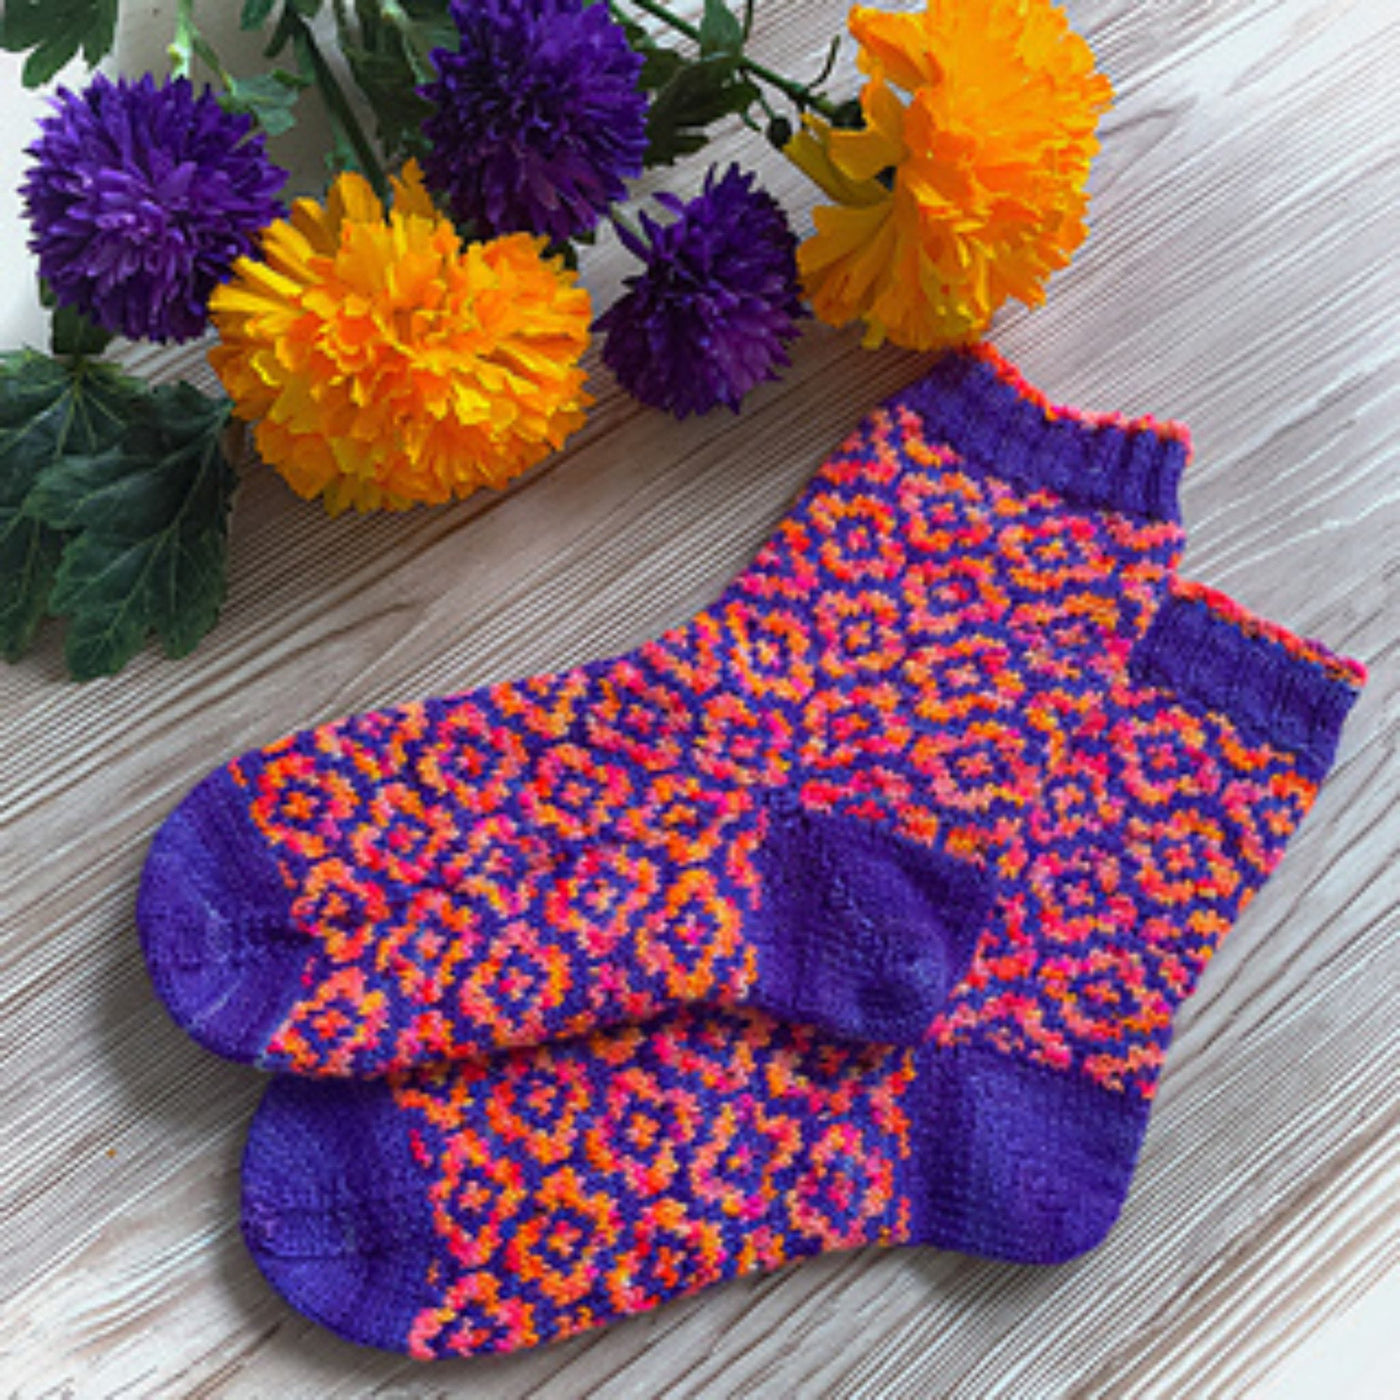 Two socks on a grey wood floor near purple and orange flowers, with purple cuffs, heels and toes and the purple, pink, and orange flower motif